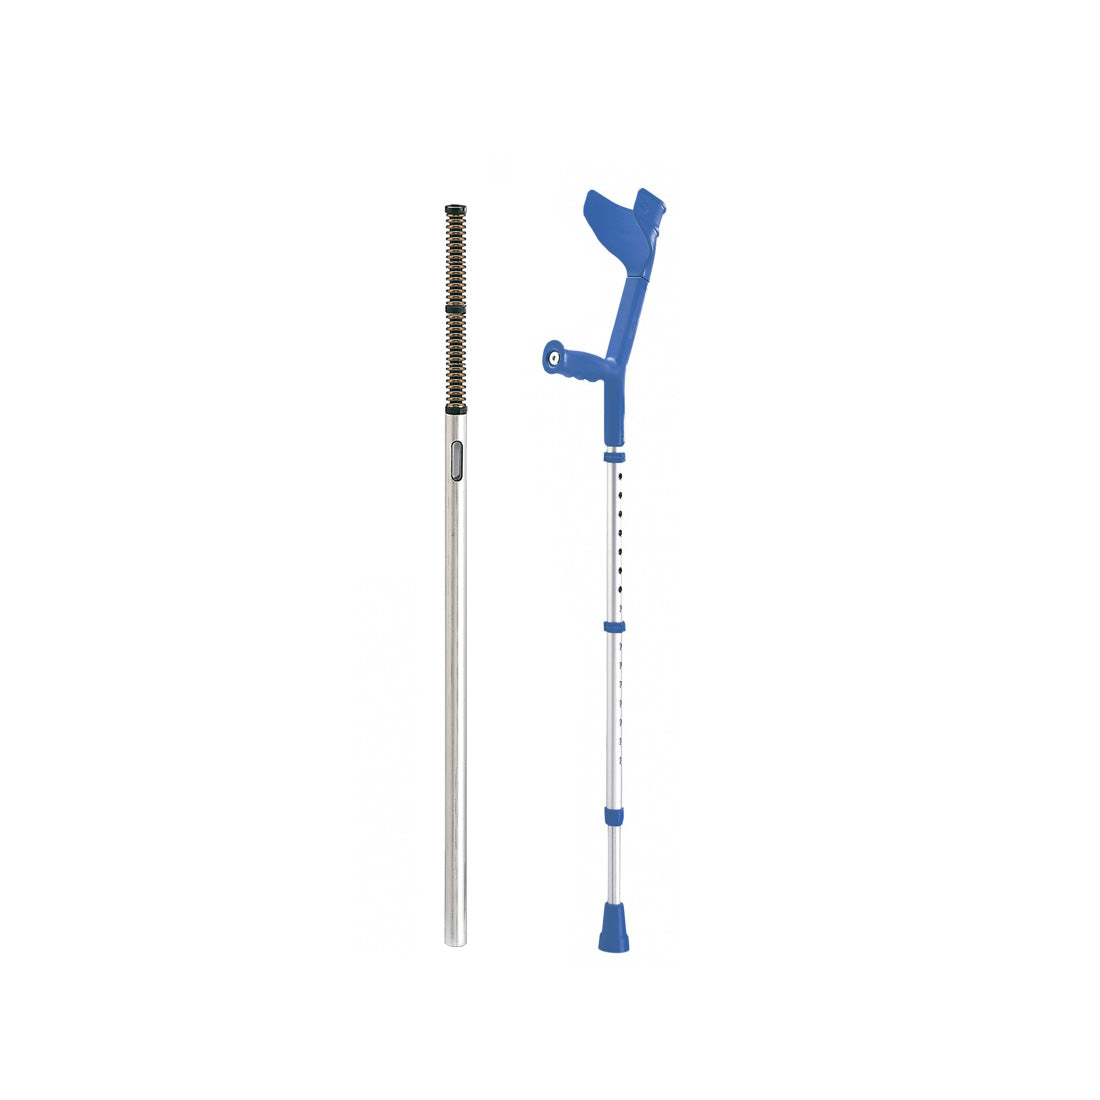 Rebotec New Walk - Crutches with Spring Shock Absorbers - Anatomic